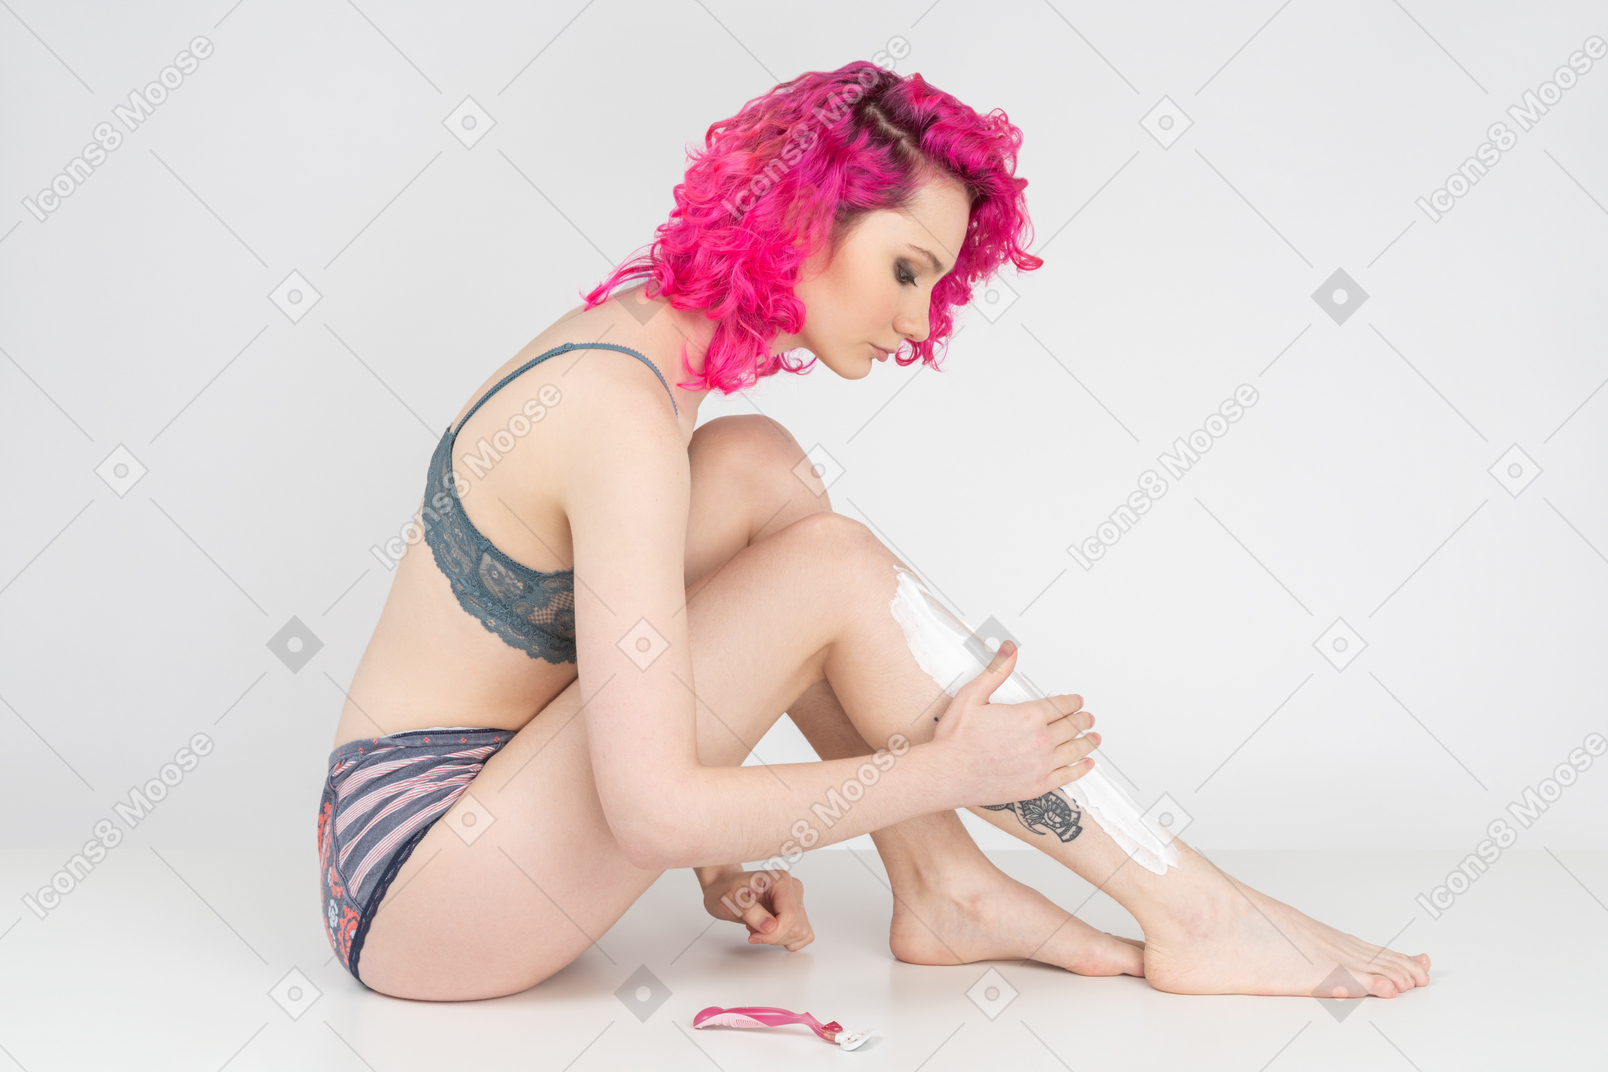 Young woman sitting on the floor and applying shaving cream